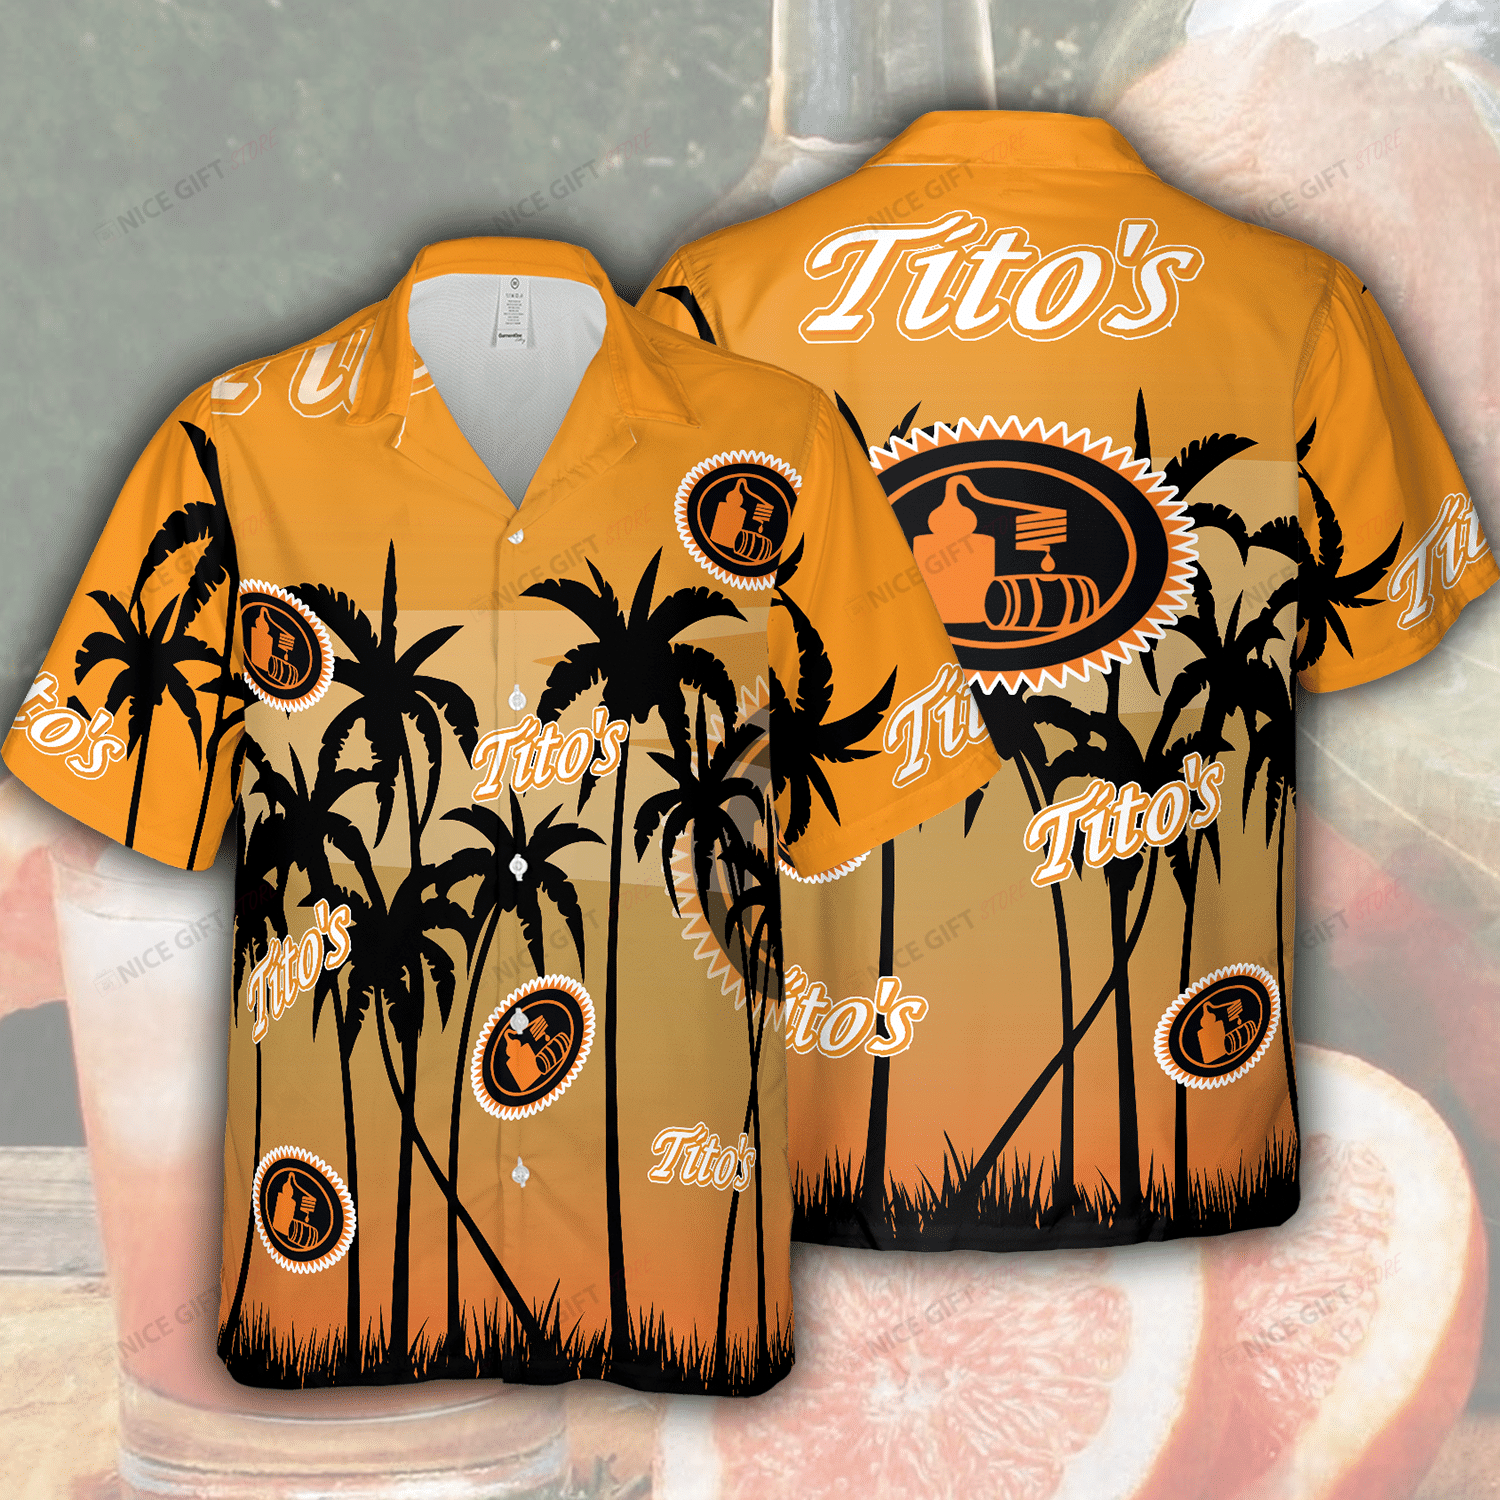 There are several types of Hawaiian shirts available on the market 129